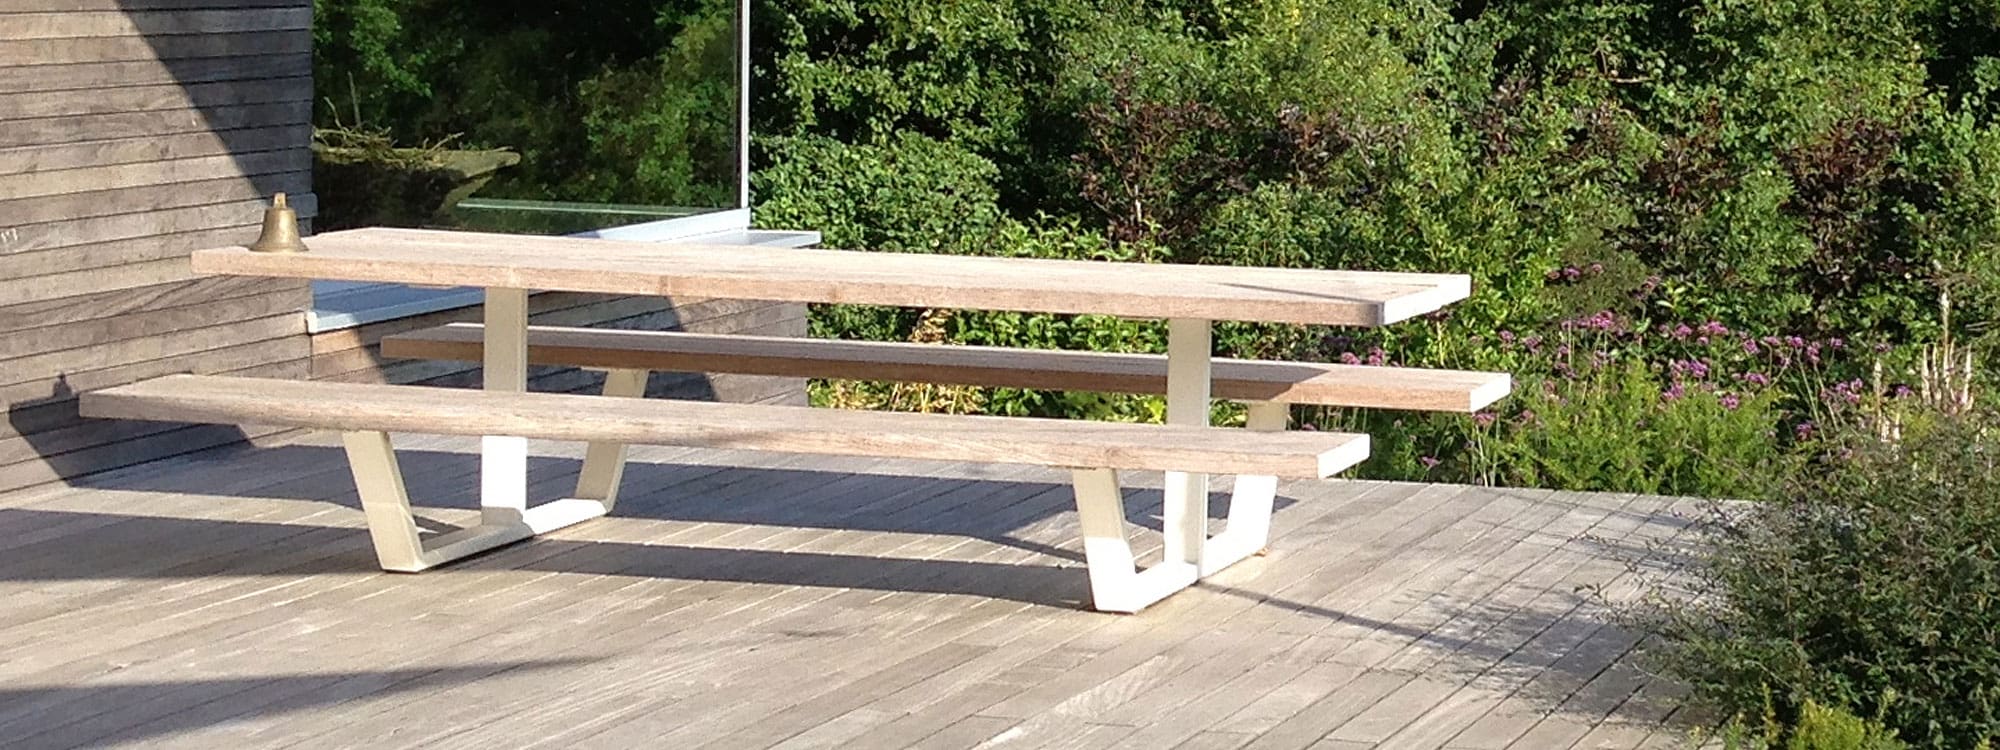 Image of Cassecroute minimalist picnic table with white frame and weathered iroko table and bench surfaces